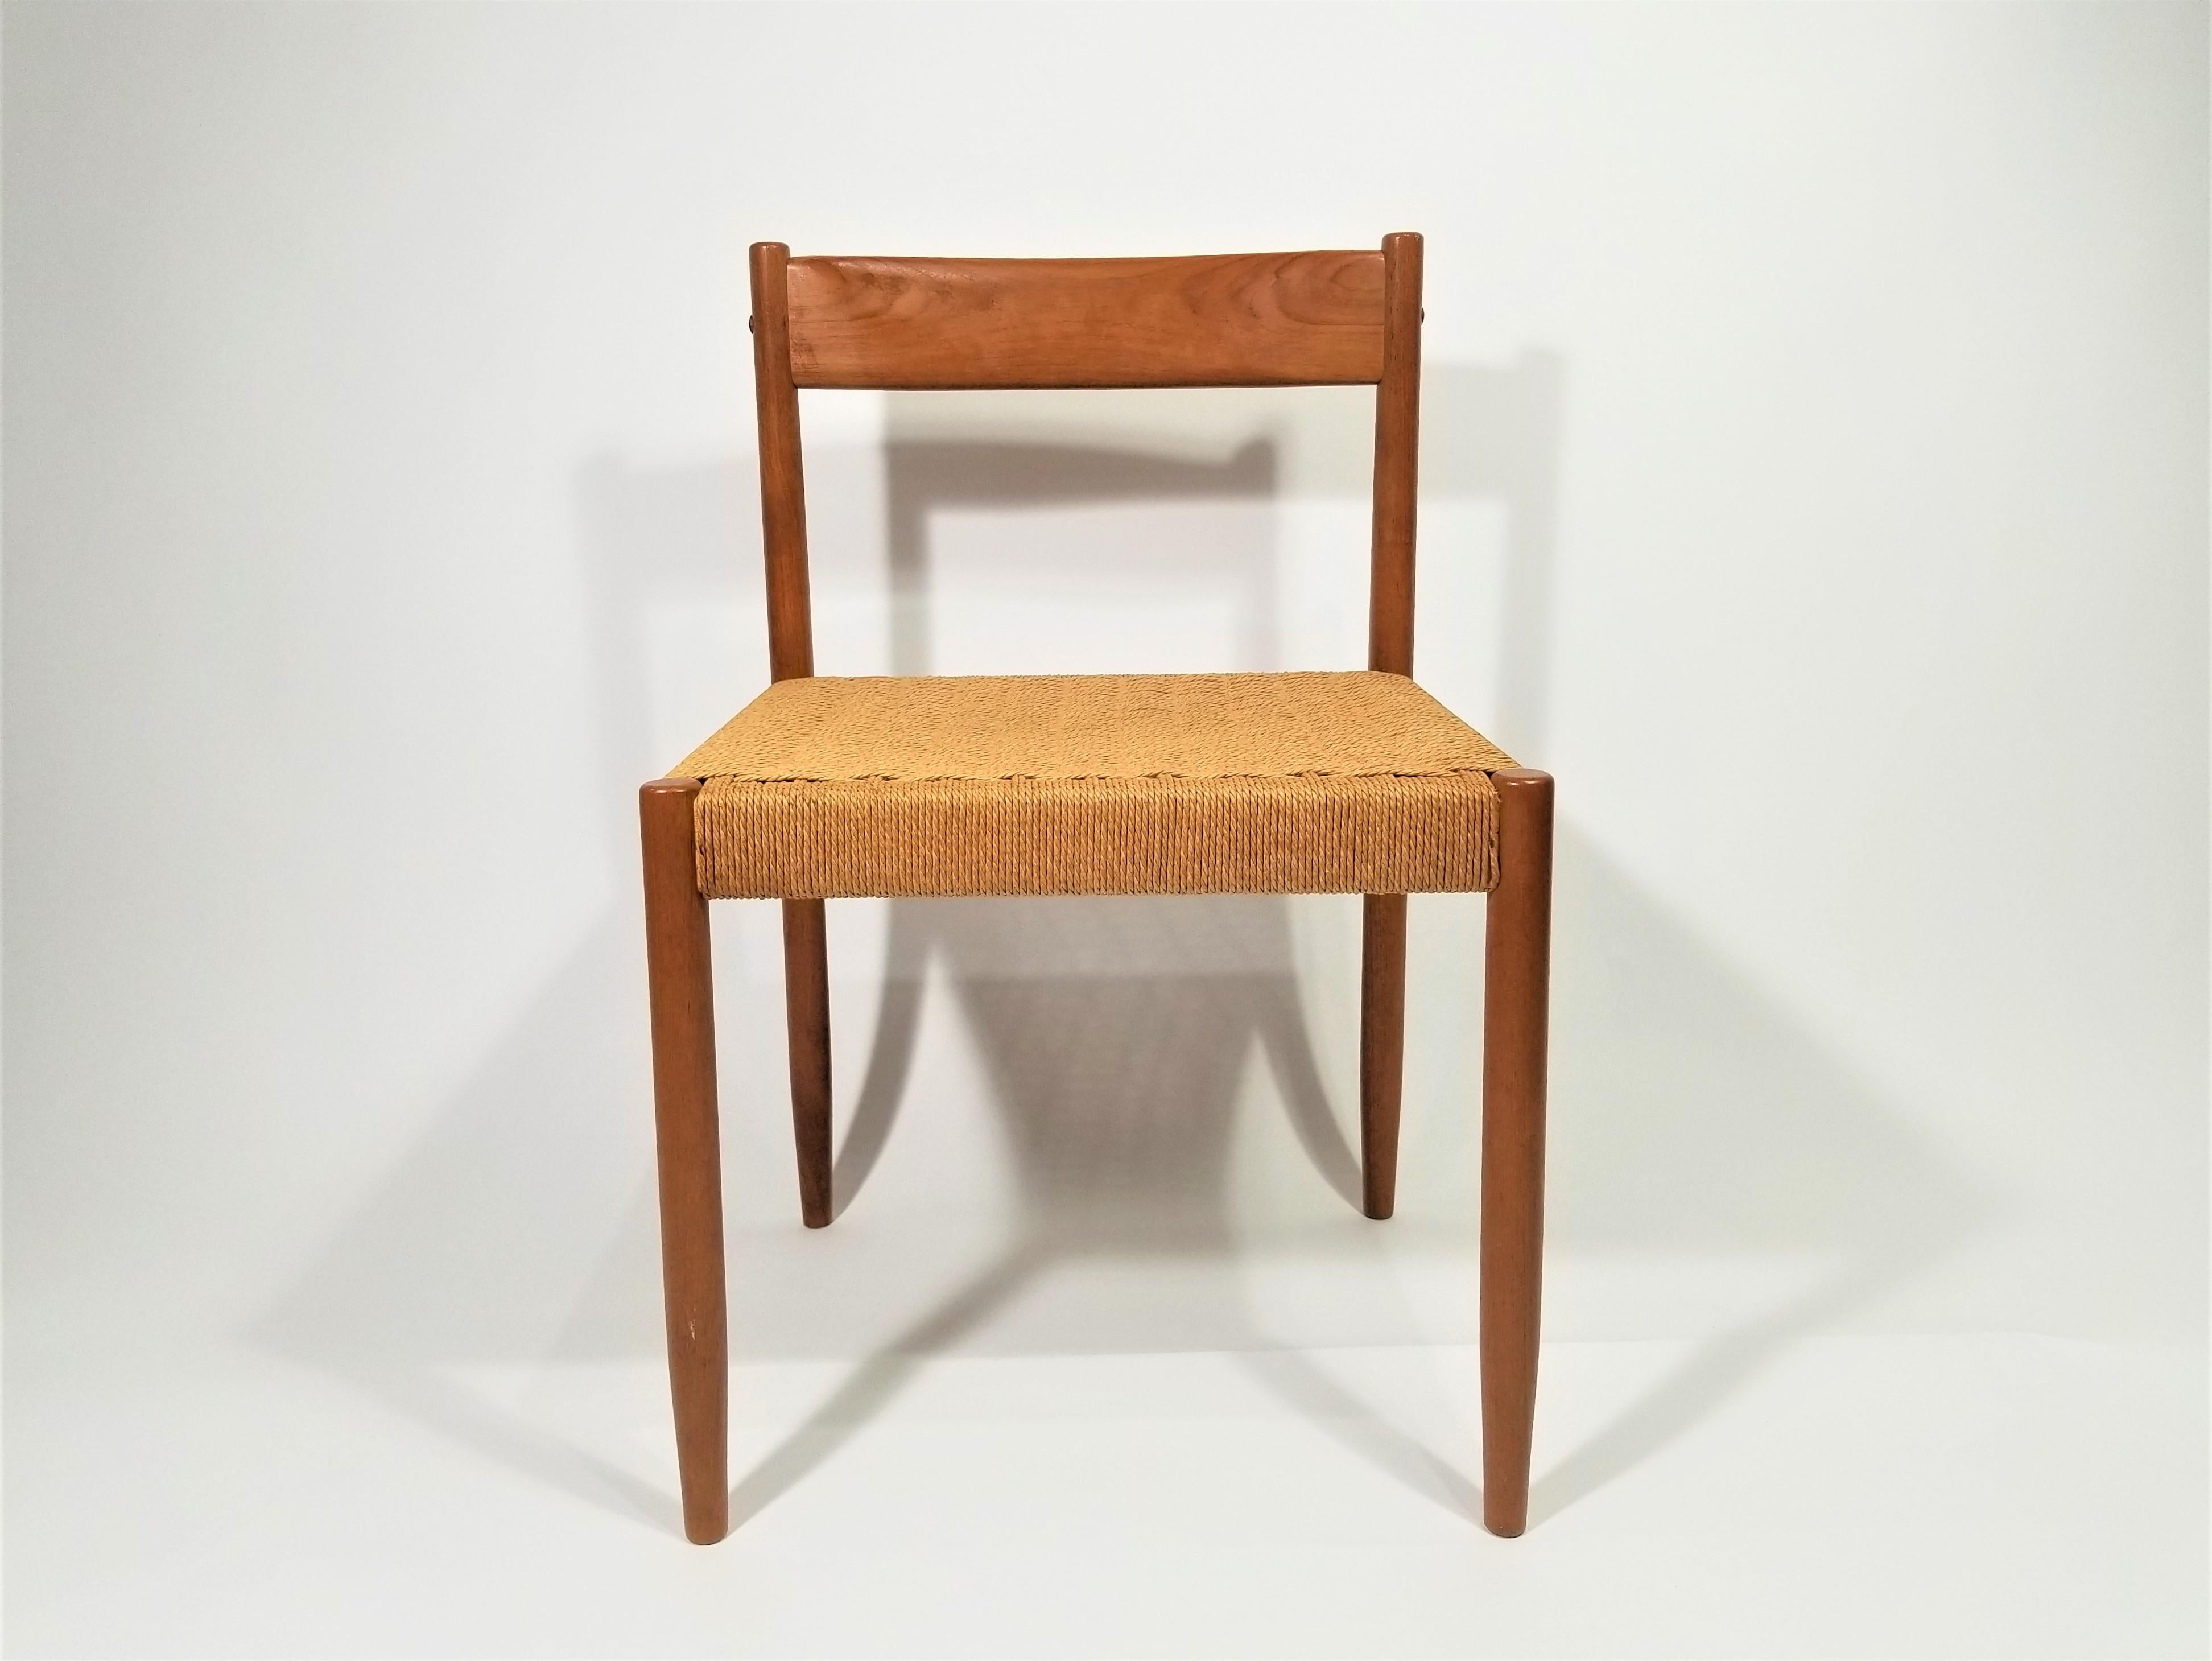 Poul Volther for Frem Rojle Danish Teak Woven Chair Midcentury 1960s  In Excellent Condition For Sale In New York, NY